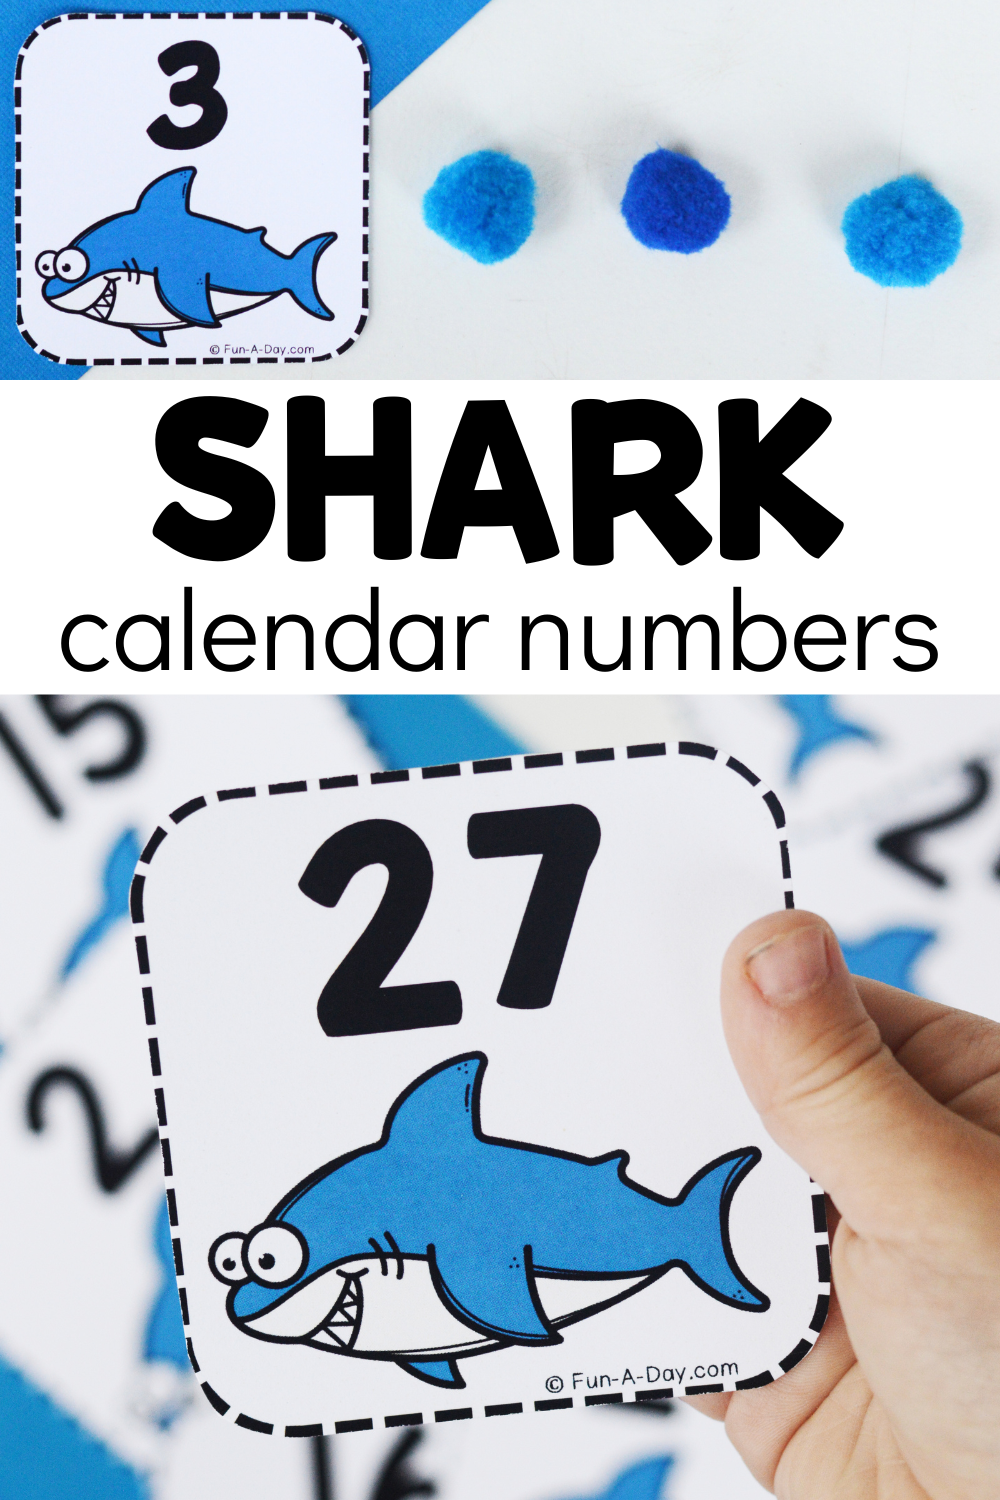 printable shark numbers with text that reads shark calendar numbers